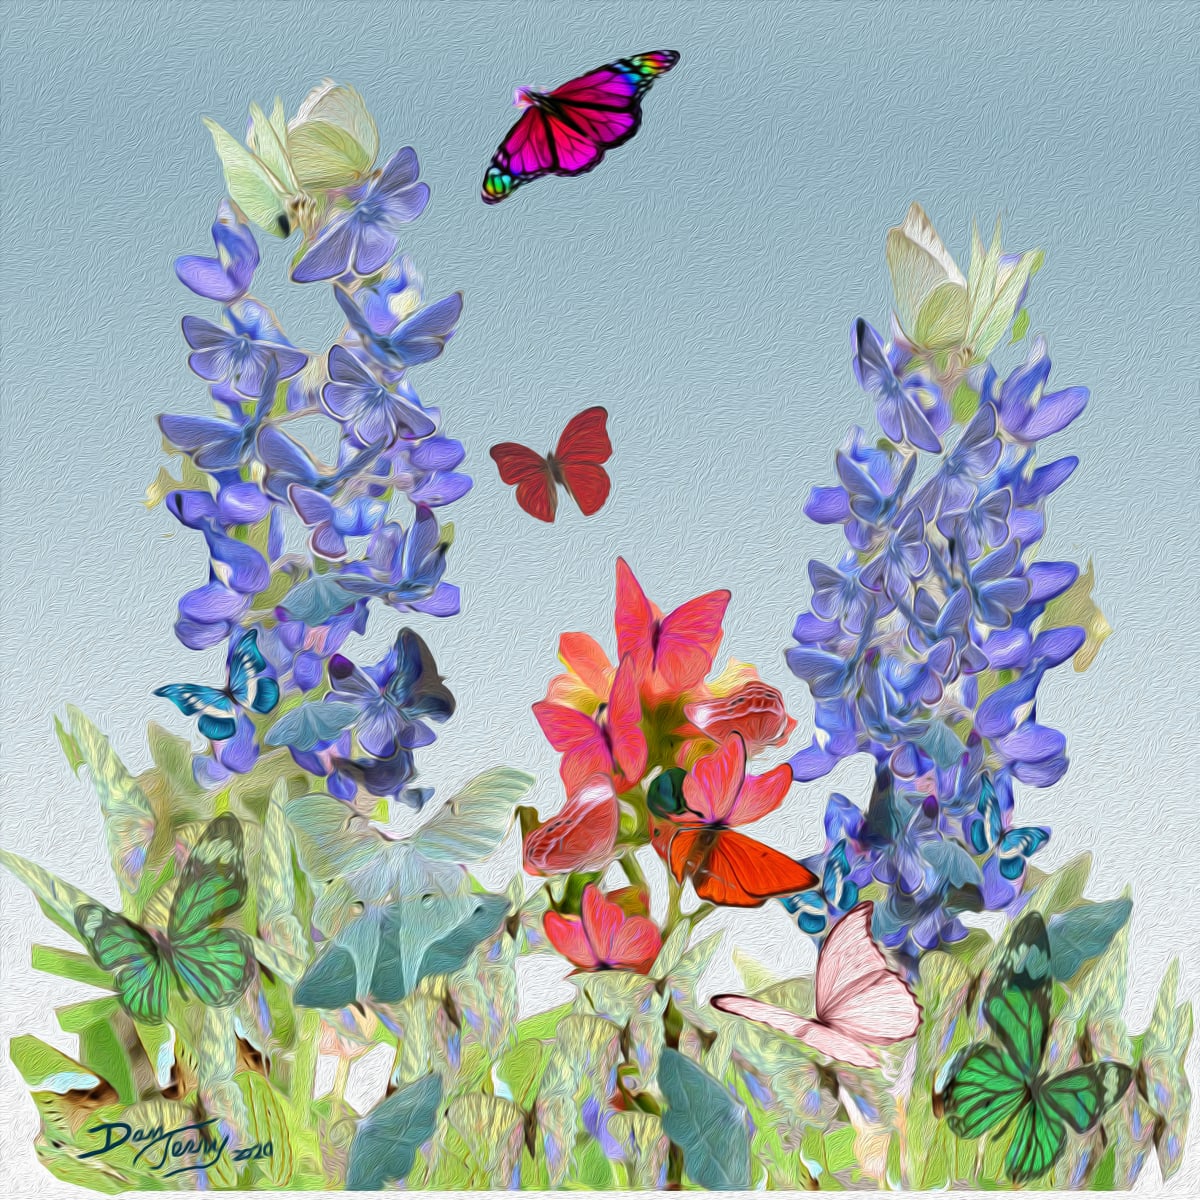 Butterfly bluebonnets Limited Edition Giclee by Dan Terry  Image: For those who love both butterflies and bluebonnet wild flowers this print combines both into a unique image where flora and fauna merge. 